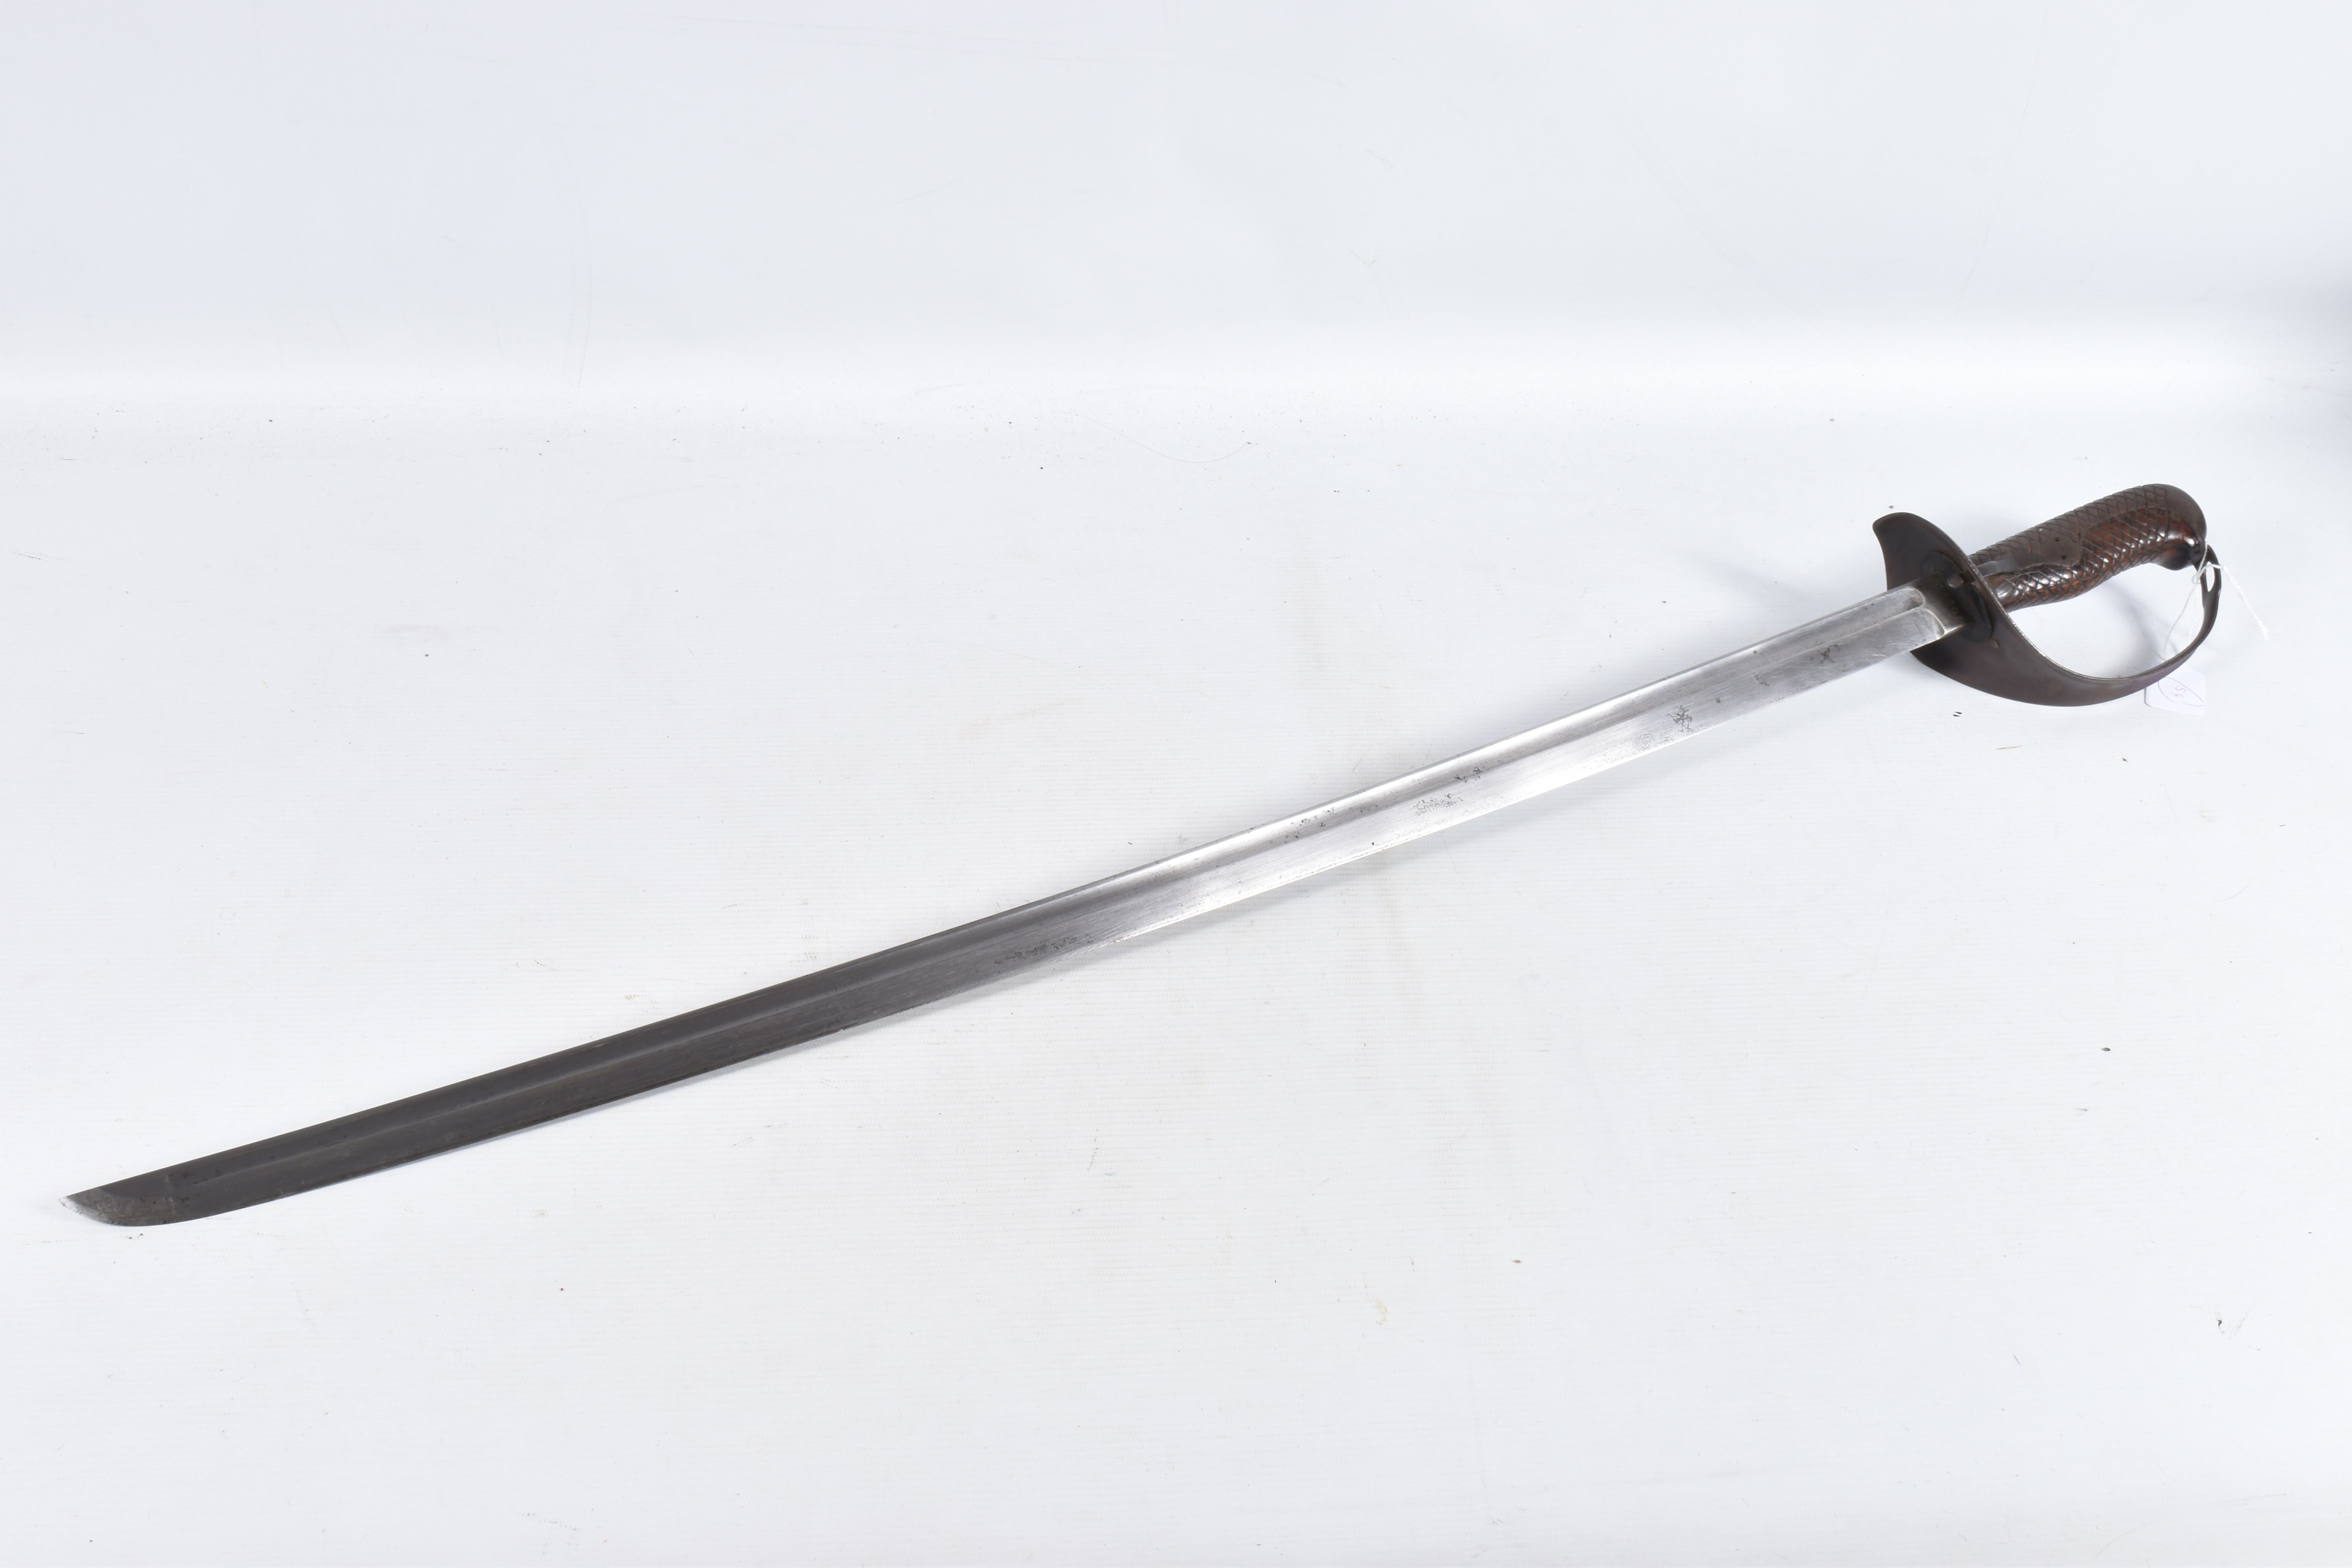 A JAPANESE TYPE 32 OTSU SABRE, the blade has no markings but has the serial number 60866 at the - Image 14 of 29